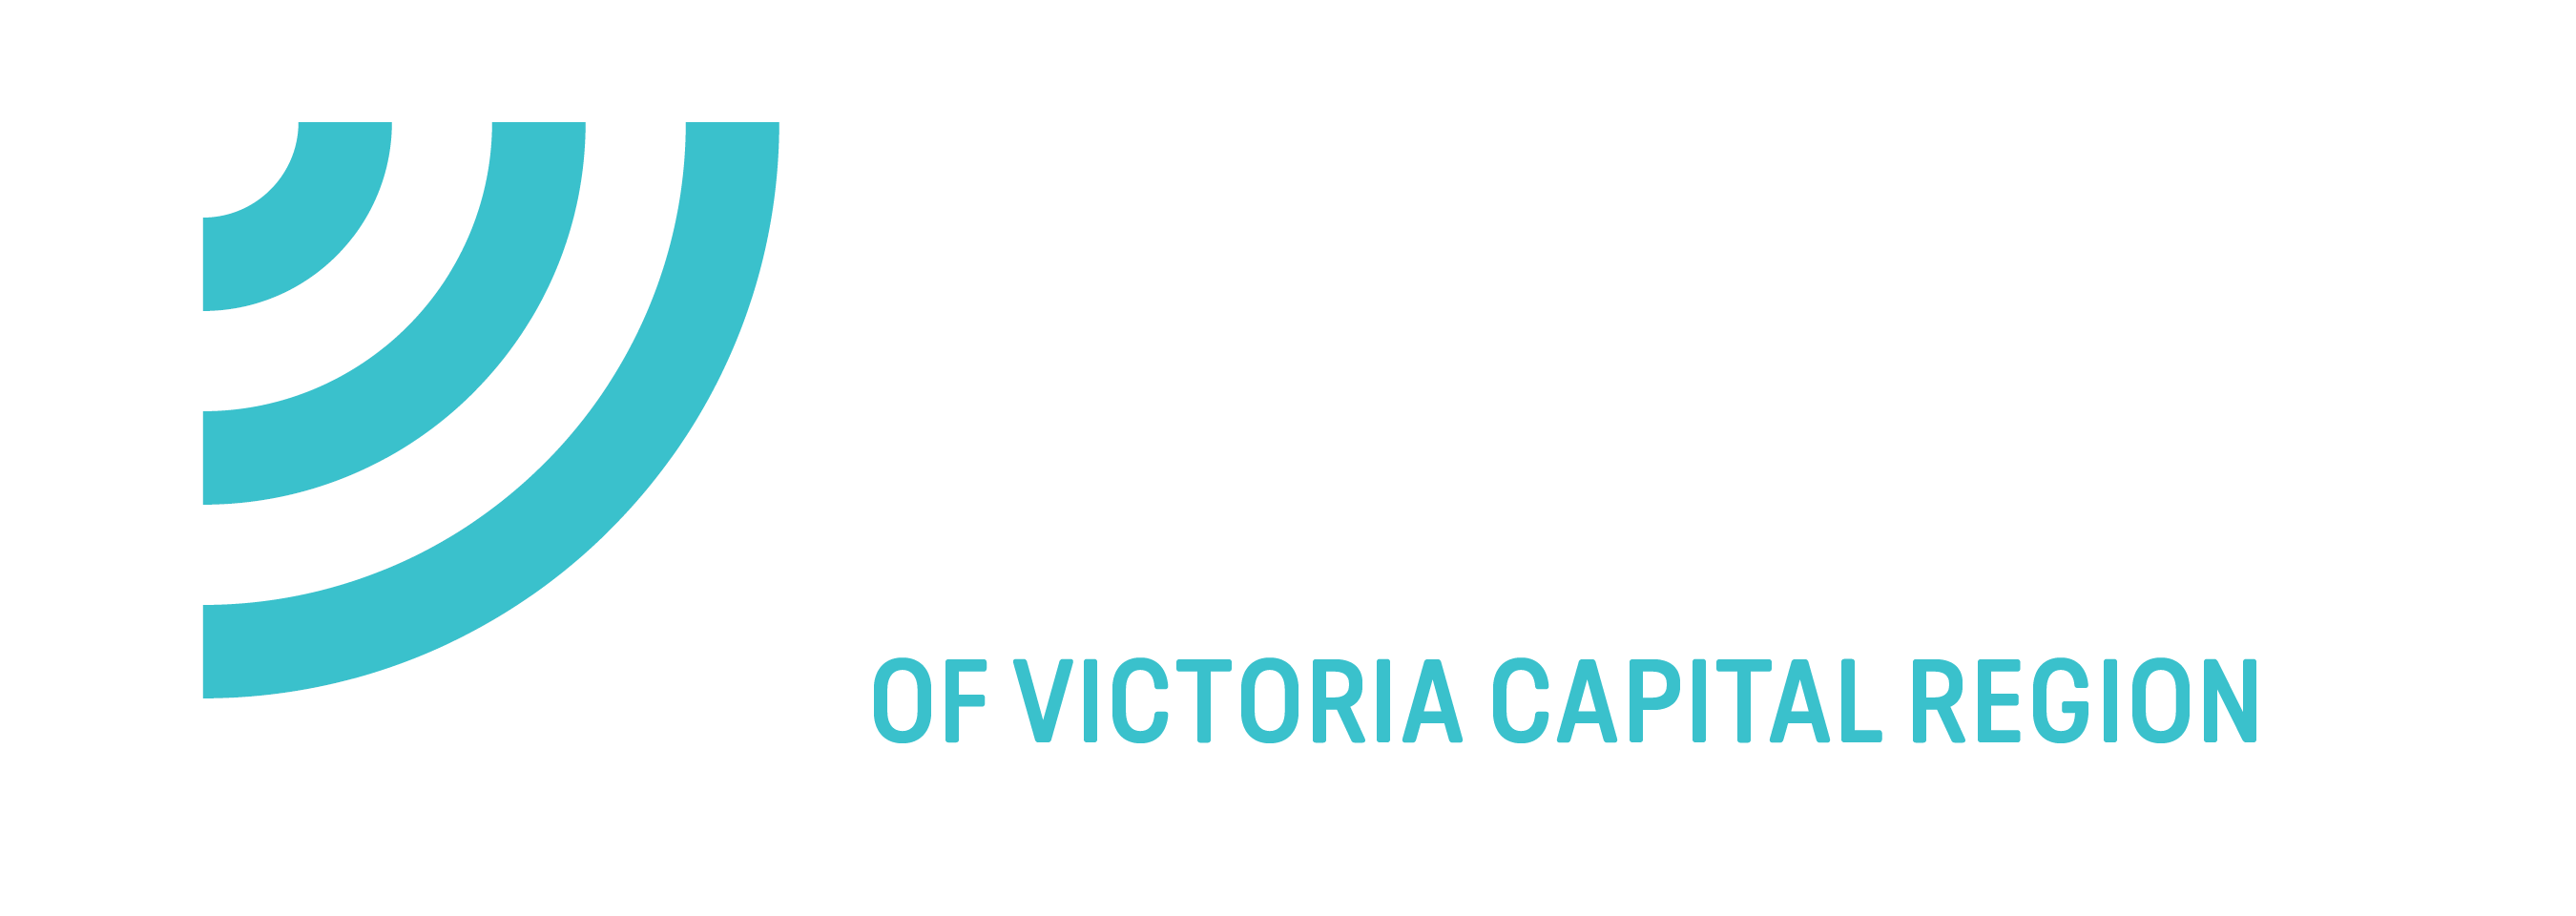 Move For Mentoring 2022 - Big Brothers Big Sisters of Victoria Capital Region